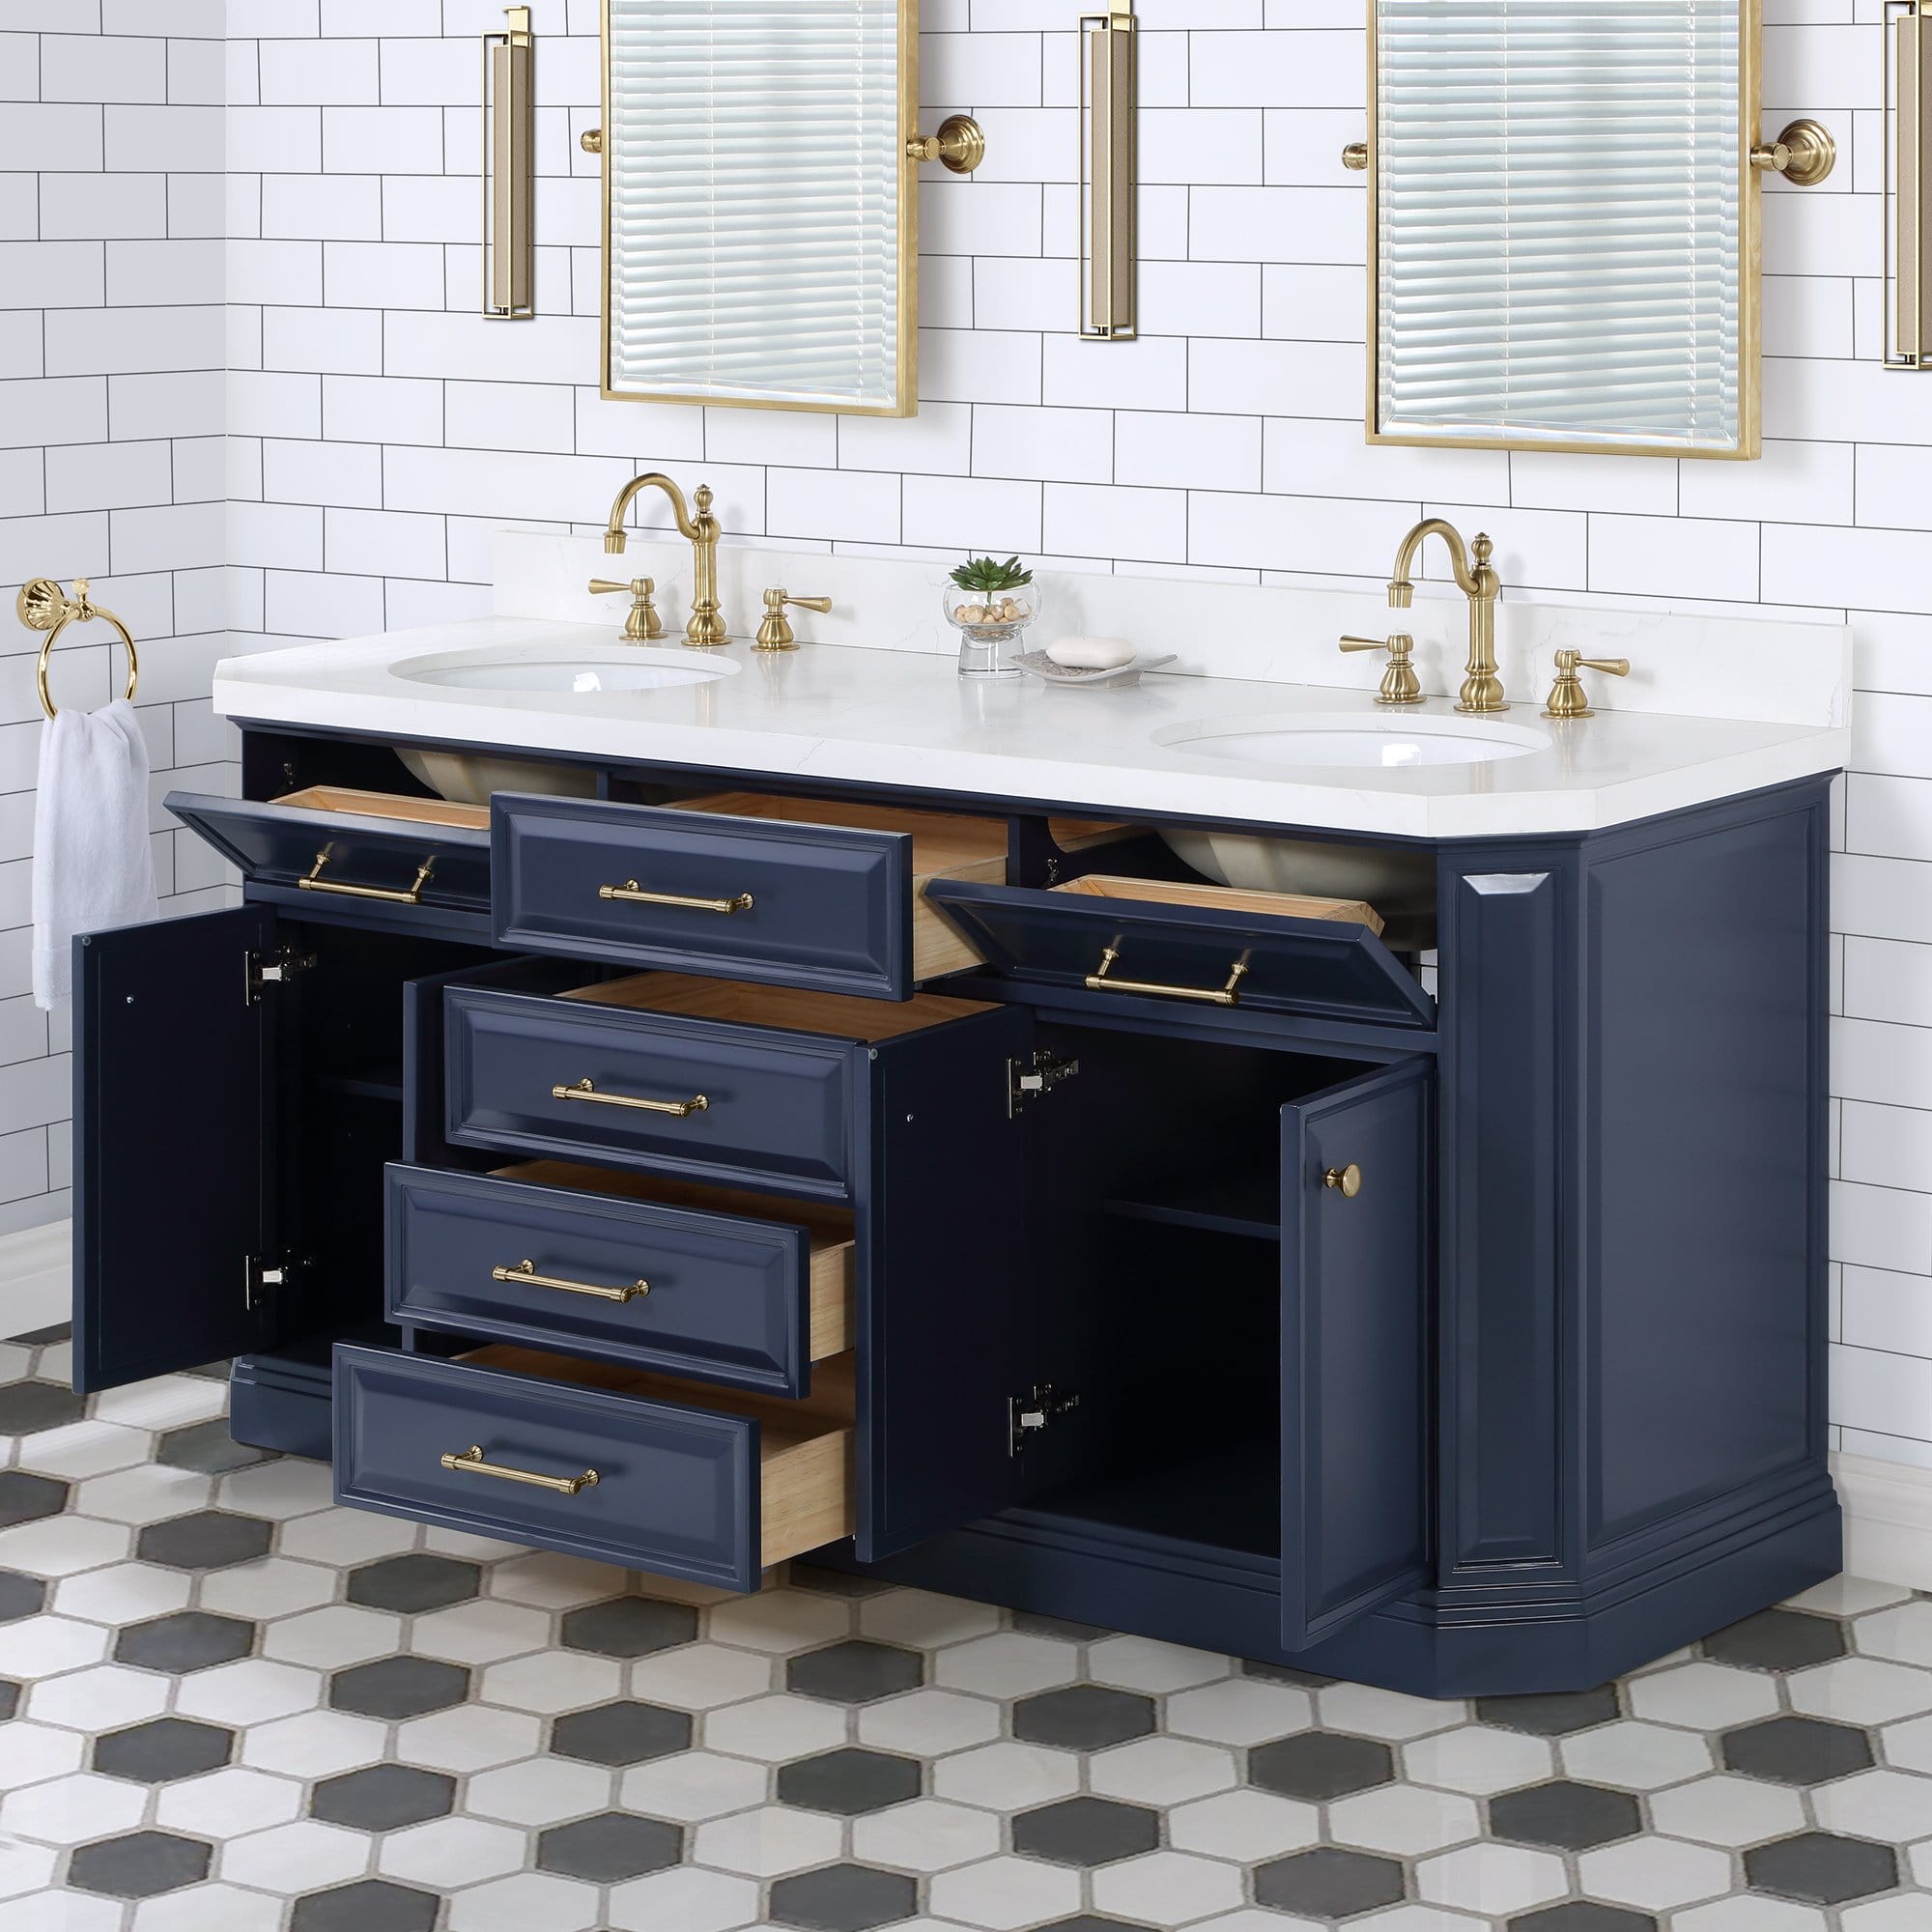 Water Creation Palace 72 In. Double Sink White Quartz Countertop Vanity in Monarch Blue and Mirrors - Molaix732030765047Bathroom vanityPA72QZ06MB-E18000000